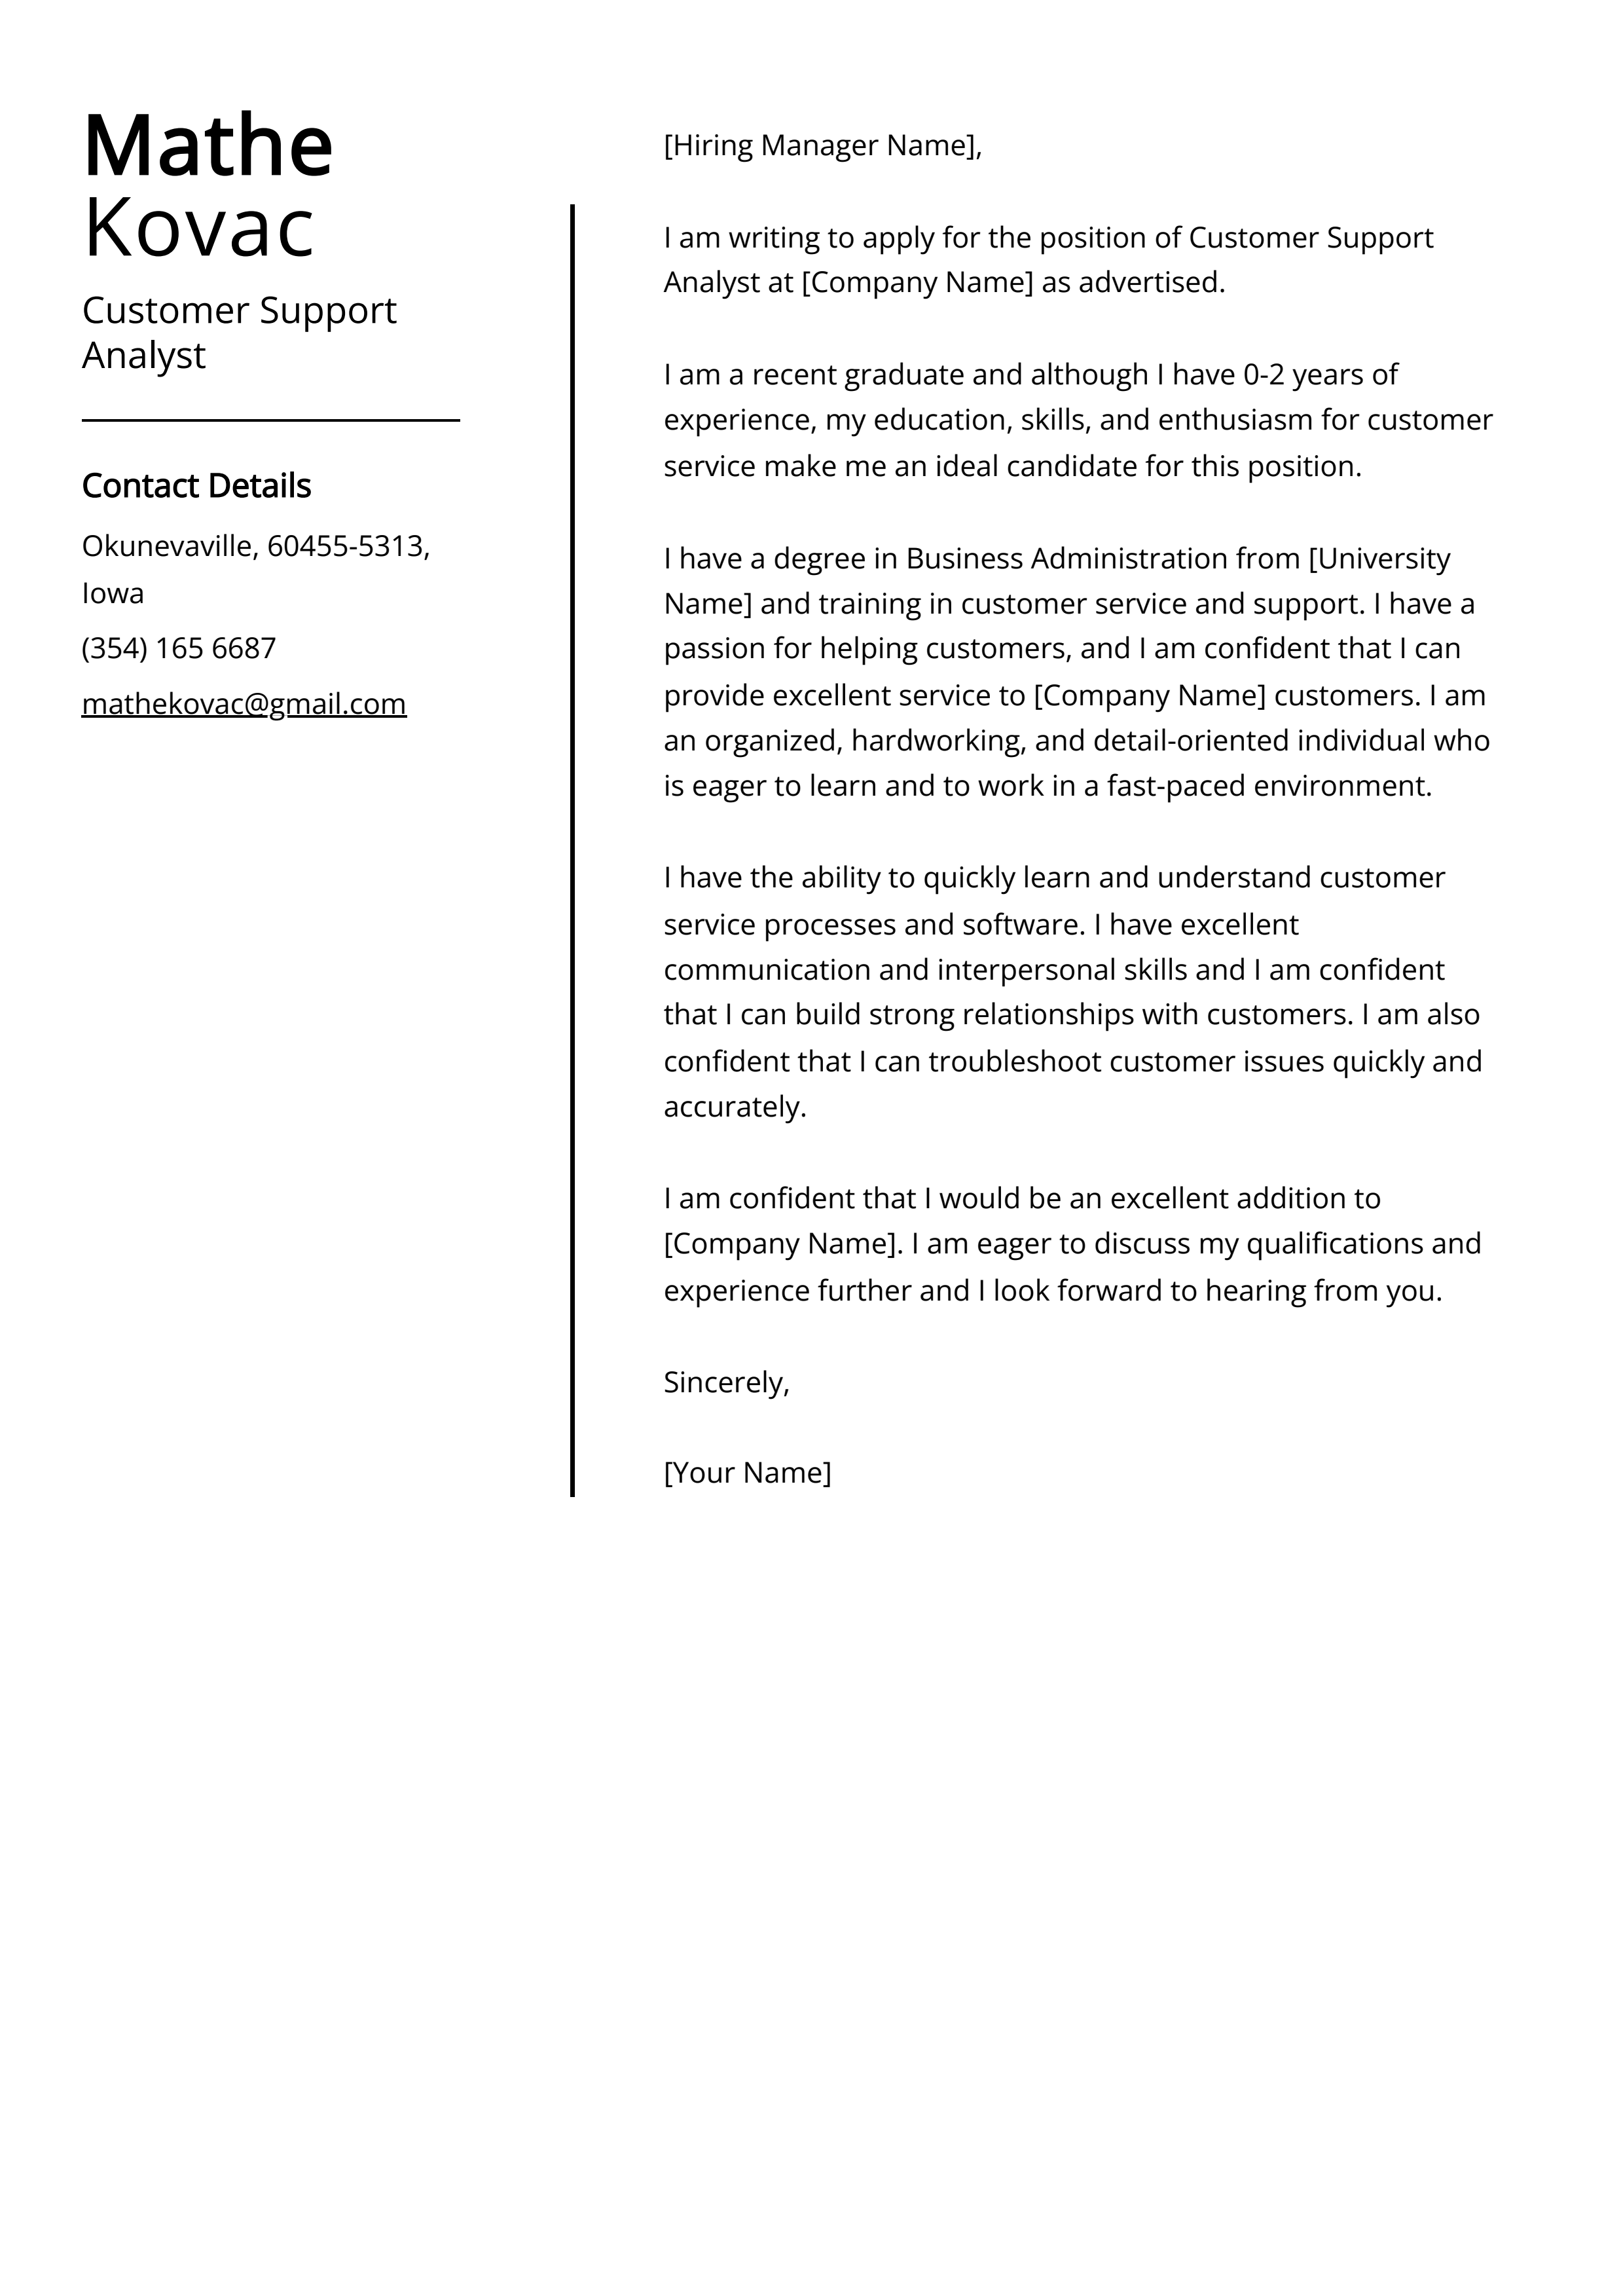 Customer Support Analyst Cover Letter Example